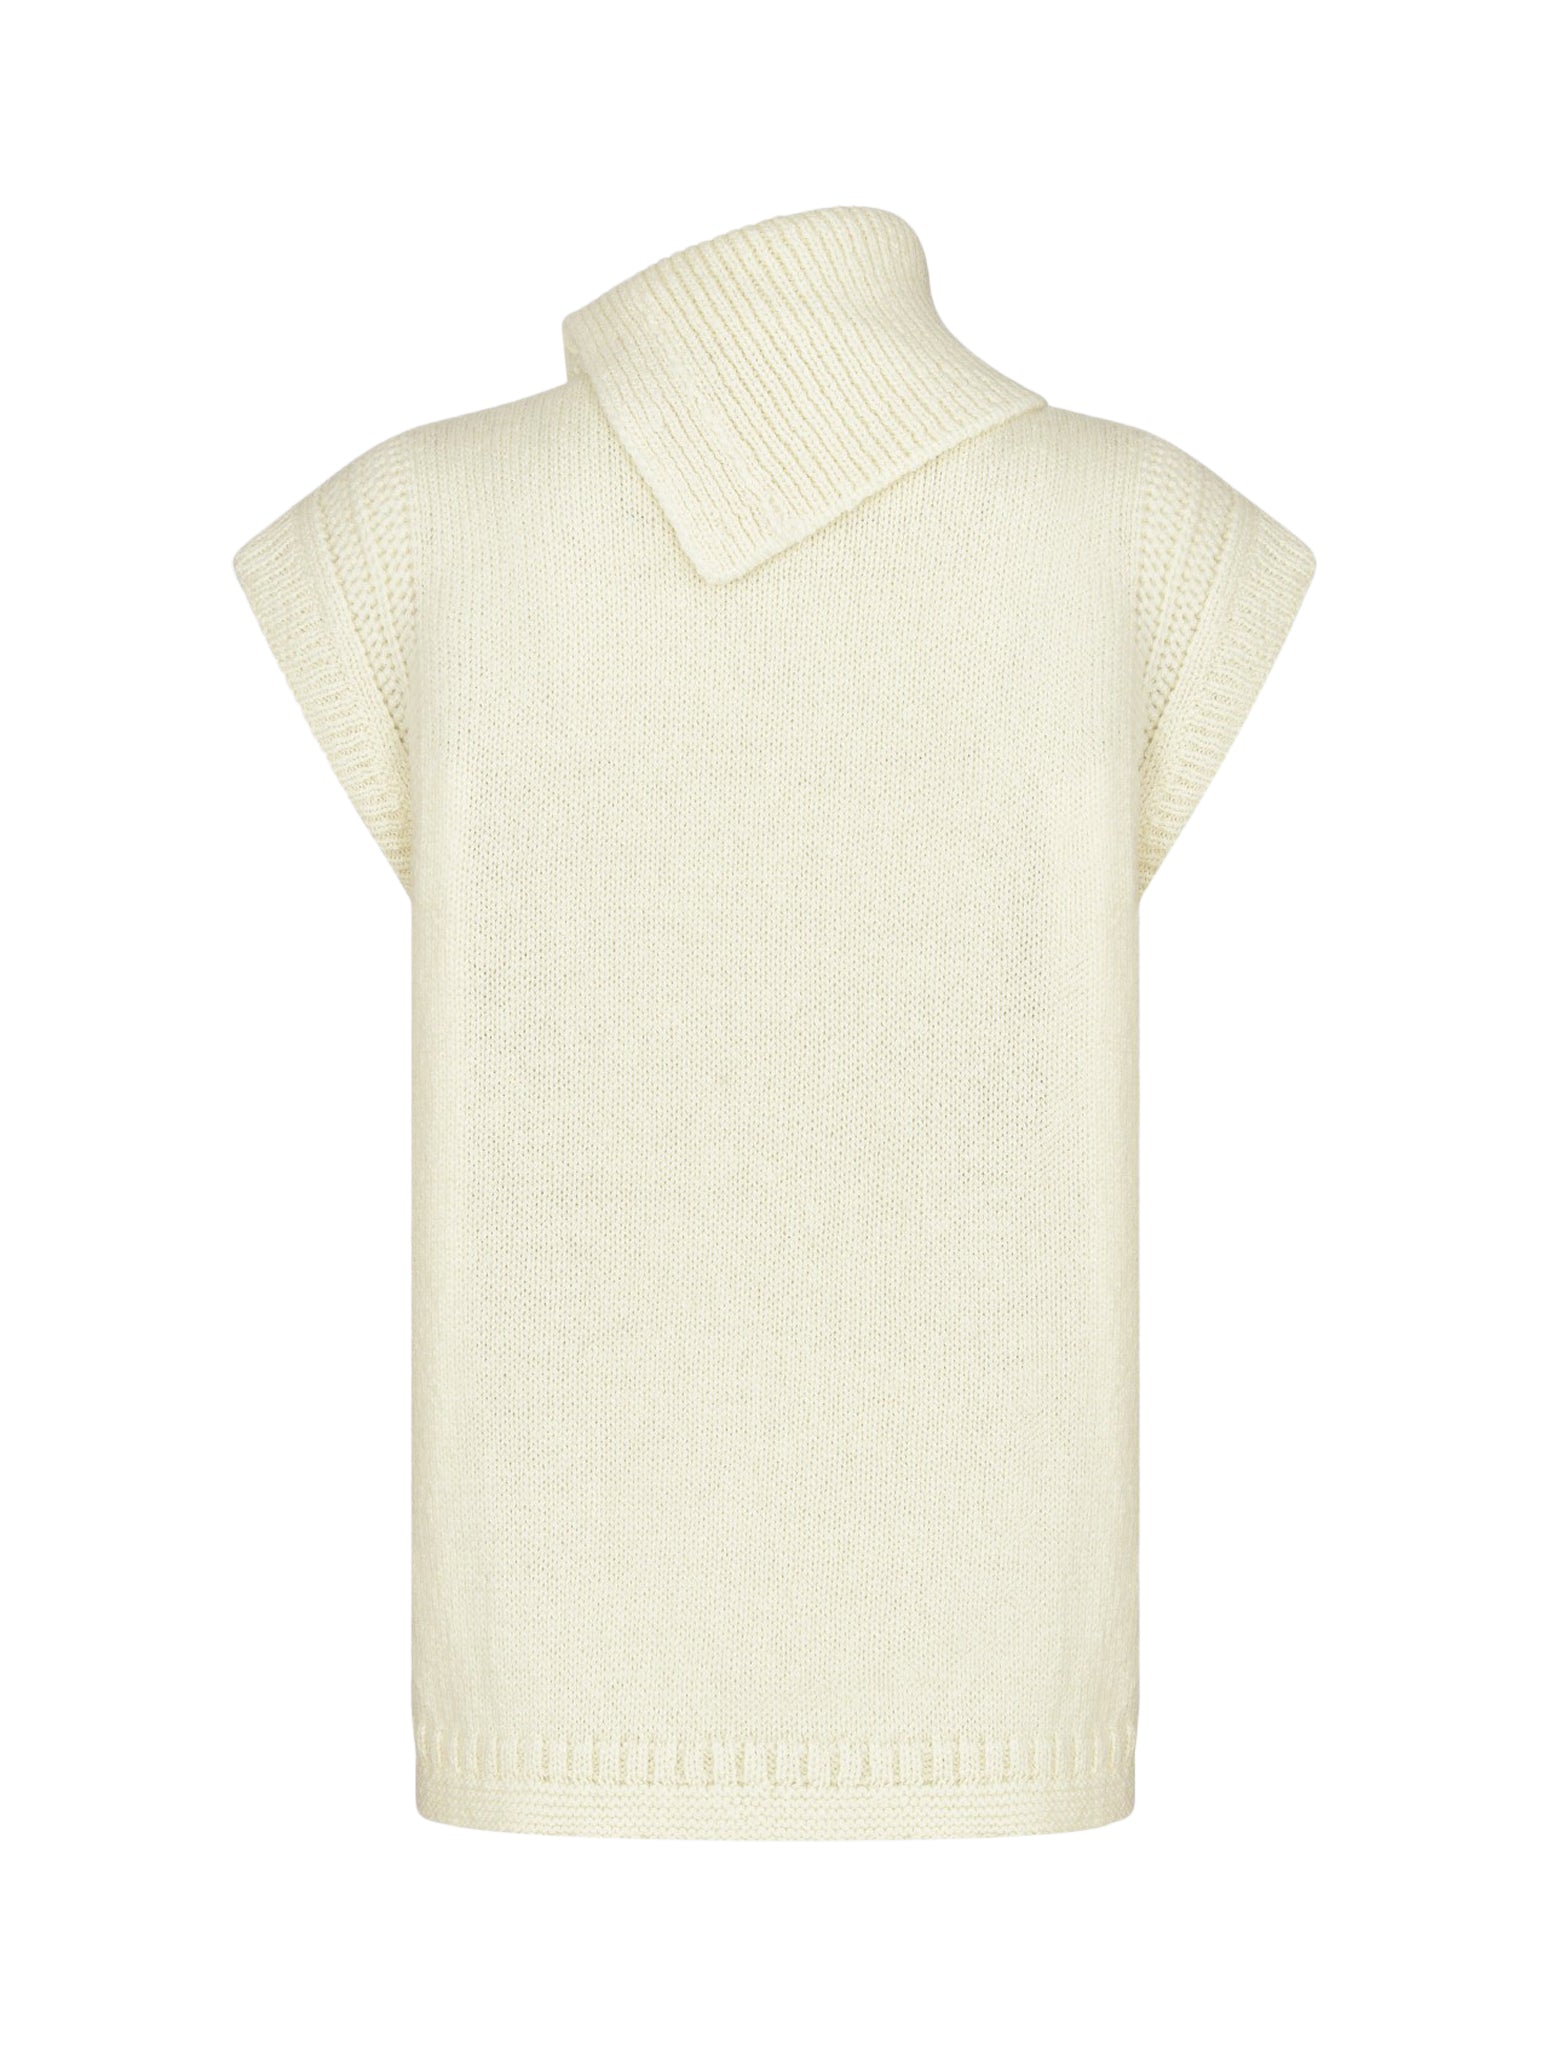 Sleeveless sweater with stand collar